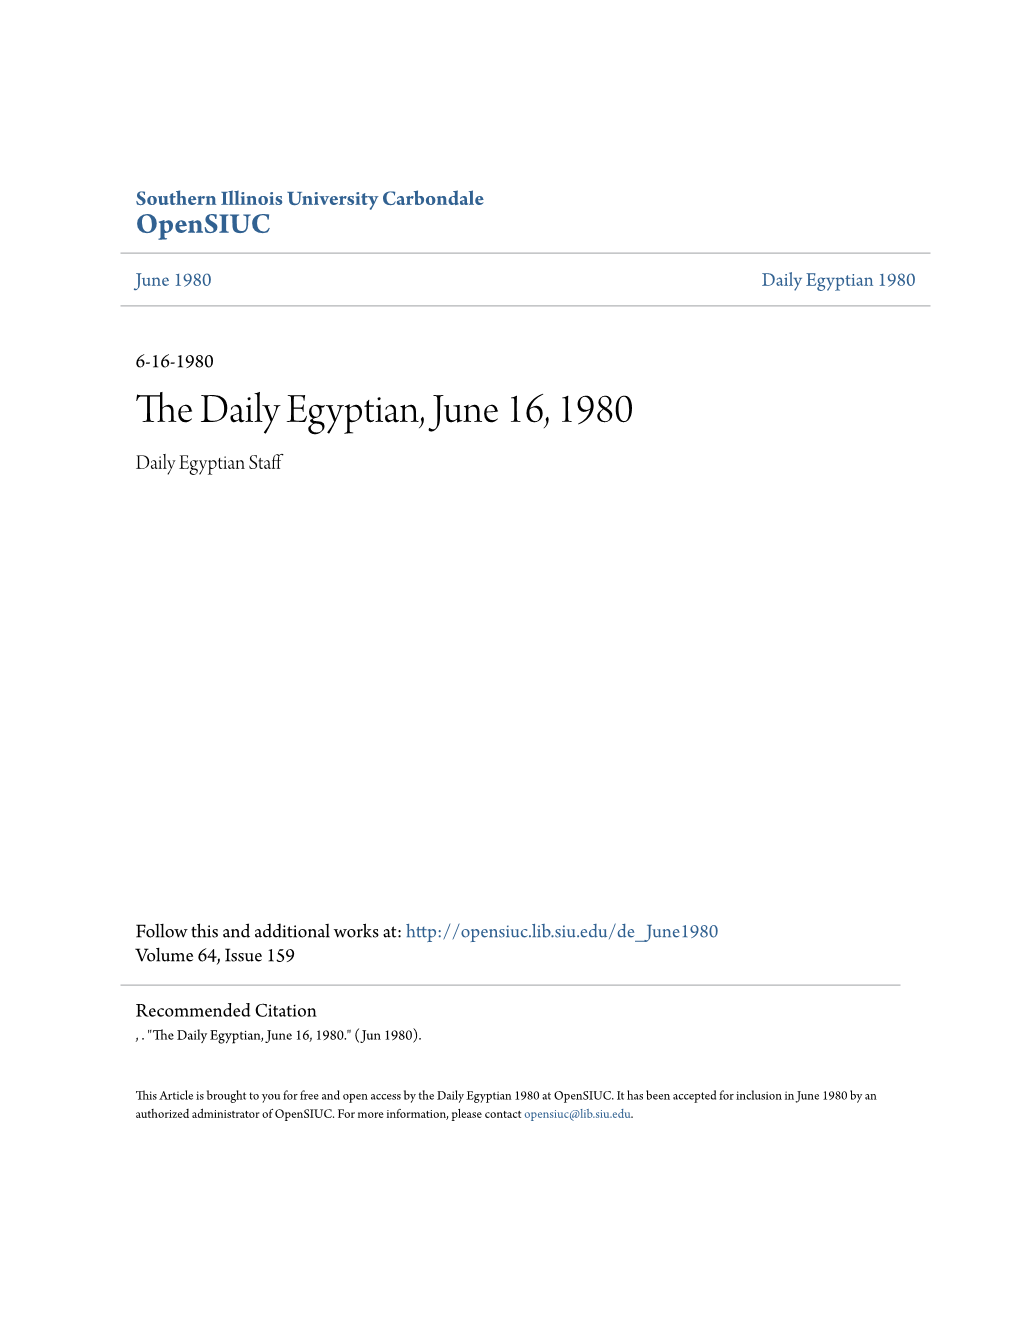 The Daily Egyptian, June 16, 1980